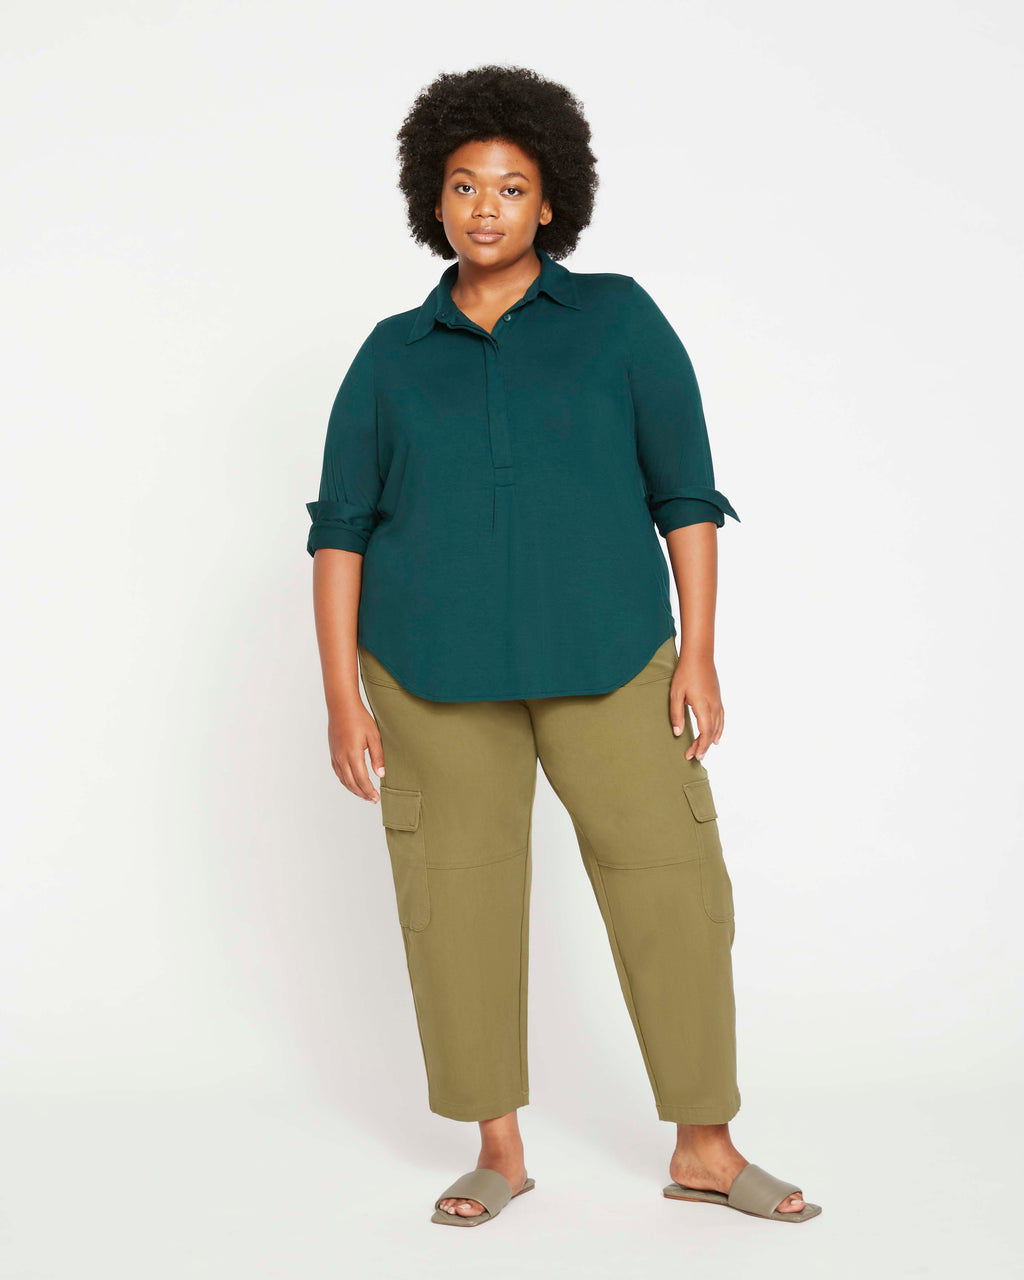 Elbe Popover Liquid Jersey Shirt Classic Fit - Forest Green - image 1